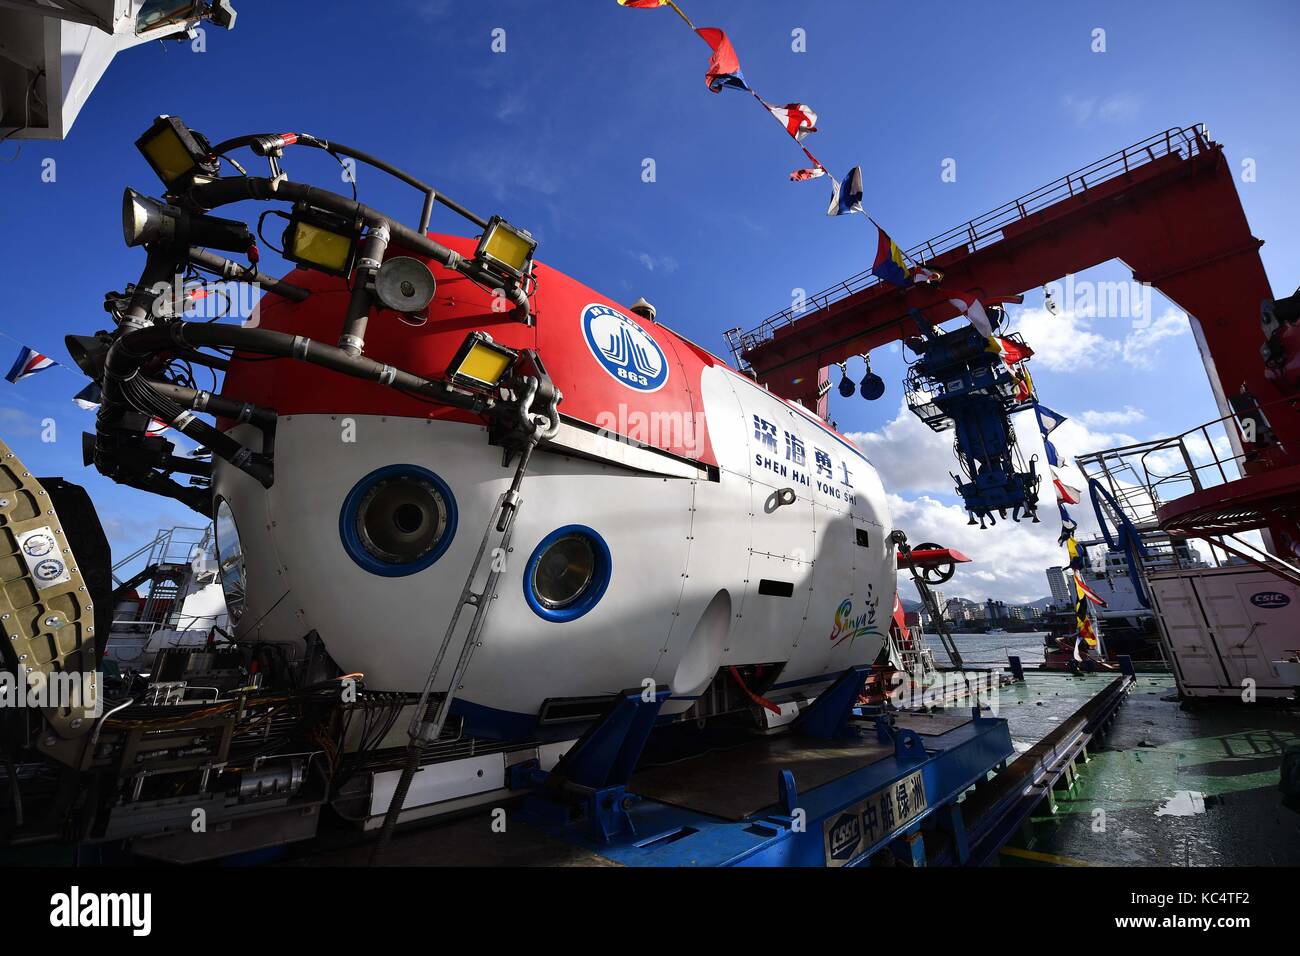 Sanya. 3rd Oct, 2017. Photo taken on Oct. 3, 2017 shows the manned submersible named Shenhai Yongshi, or deepsea warrior, in Sanya, south China's Hainan Province. China's new manned submersible, on board the ship Tansuo-1, returned to port in Sanya on Tuesday, after completing deep sea testing in the South China Sea. The manned submersible named Shenhai Yongshi reached a depth of 4,500 meters to test its functions and performance during an over 50-day expedition. Credit: Guo Cheng/Xinhua/Alamy Live News Stock Photo